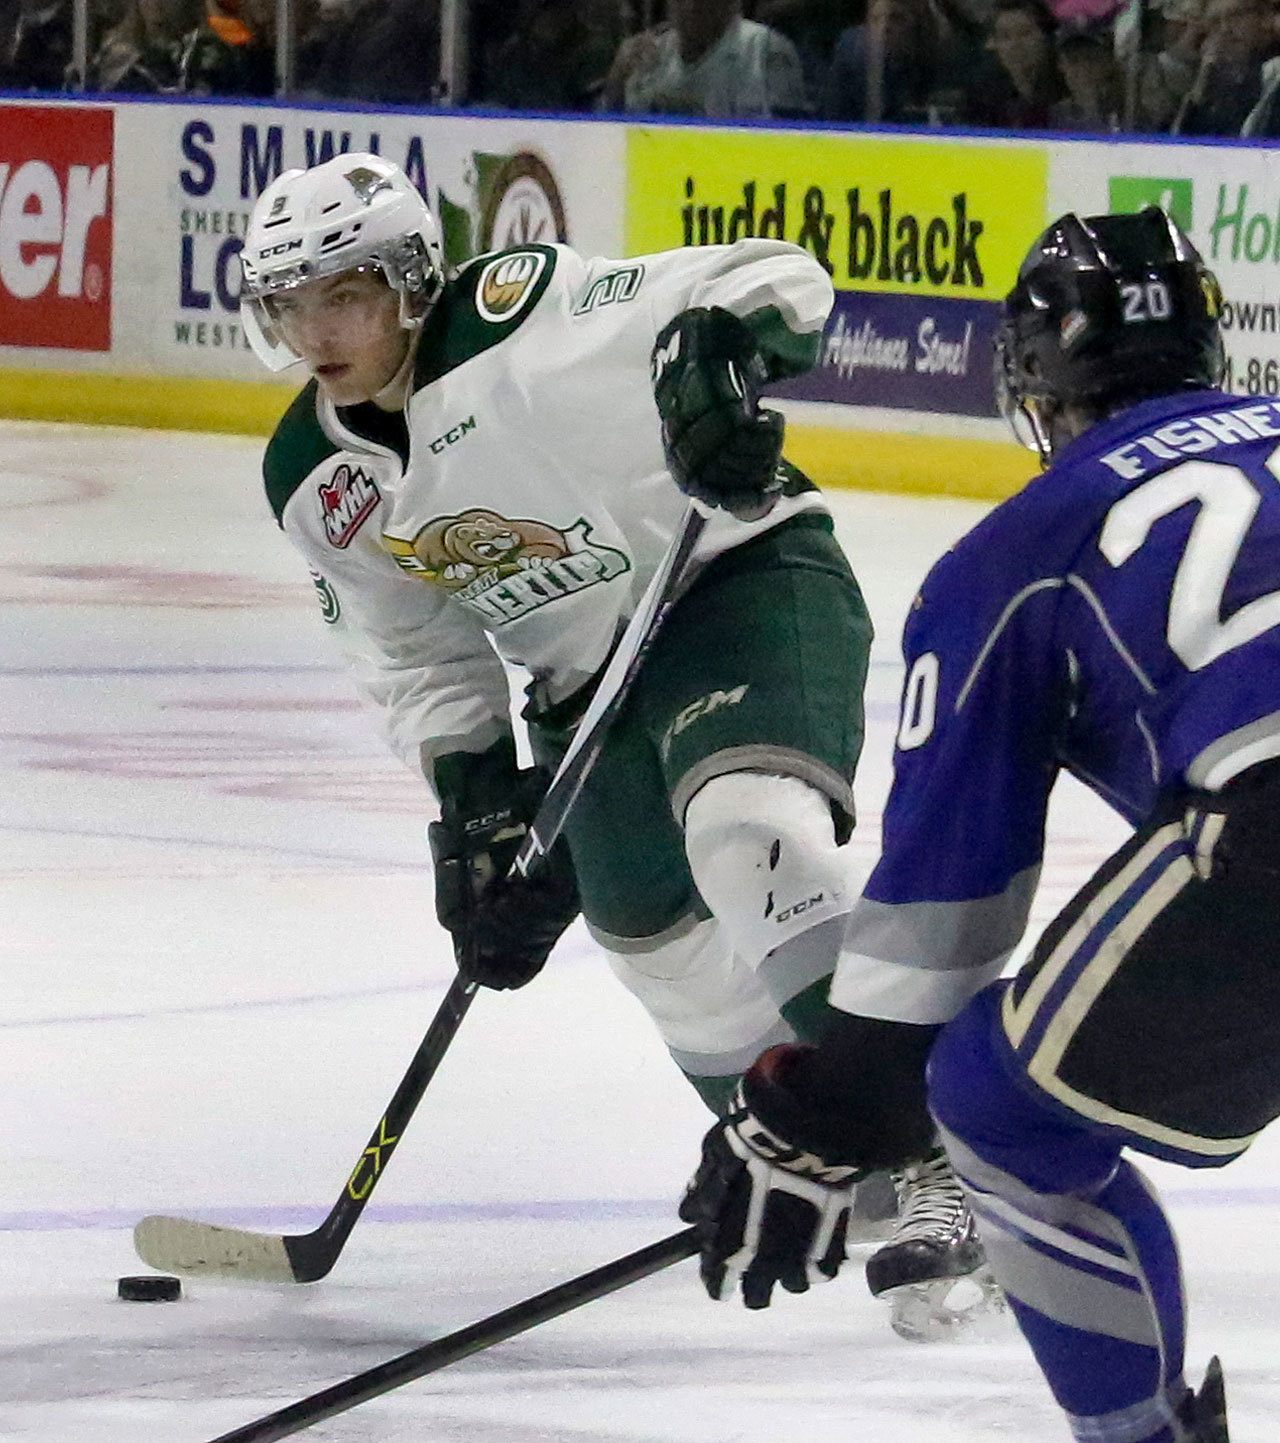 The Silvertips’ Noah Juulsen looks to pass with the Royals’ Logan Fisher defending during a game last season at Xfinity Arena in Everett. (Kevin Clark / The Herald)